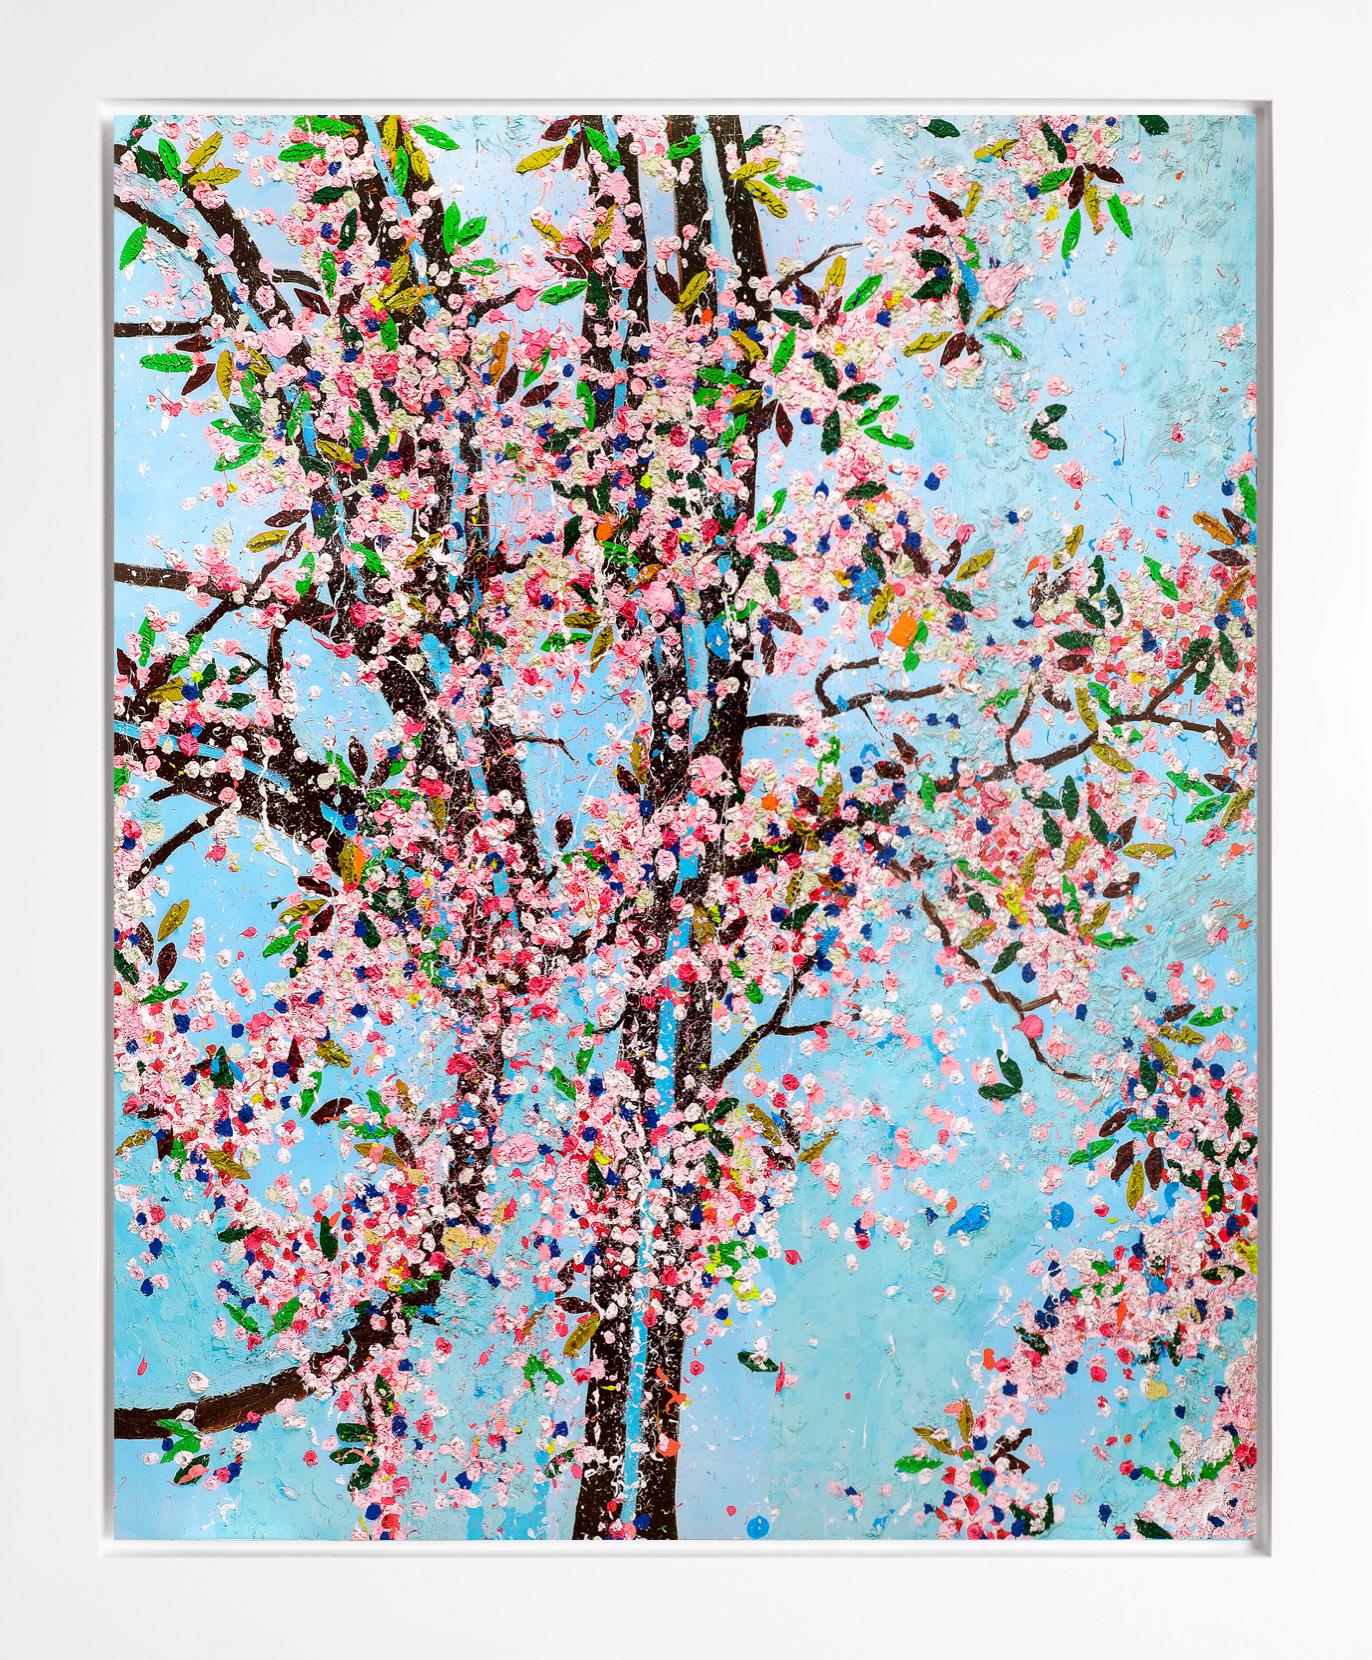 Damien Hirst Abstract Print - The Virtues 'Courage', Limited Edition 'Cherry Blossom' Landscape